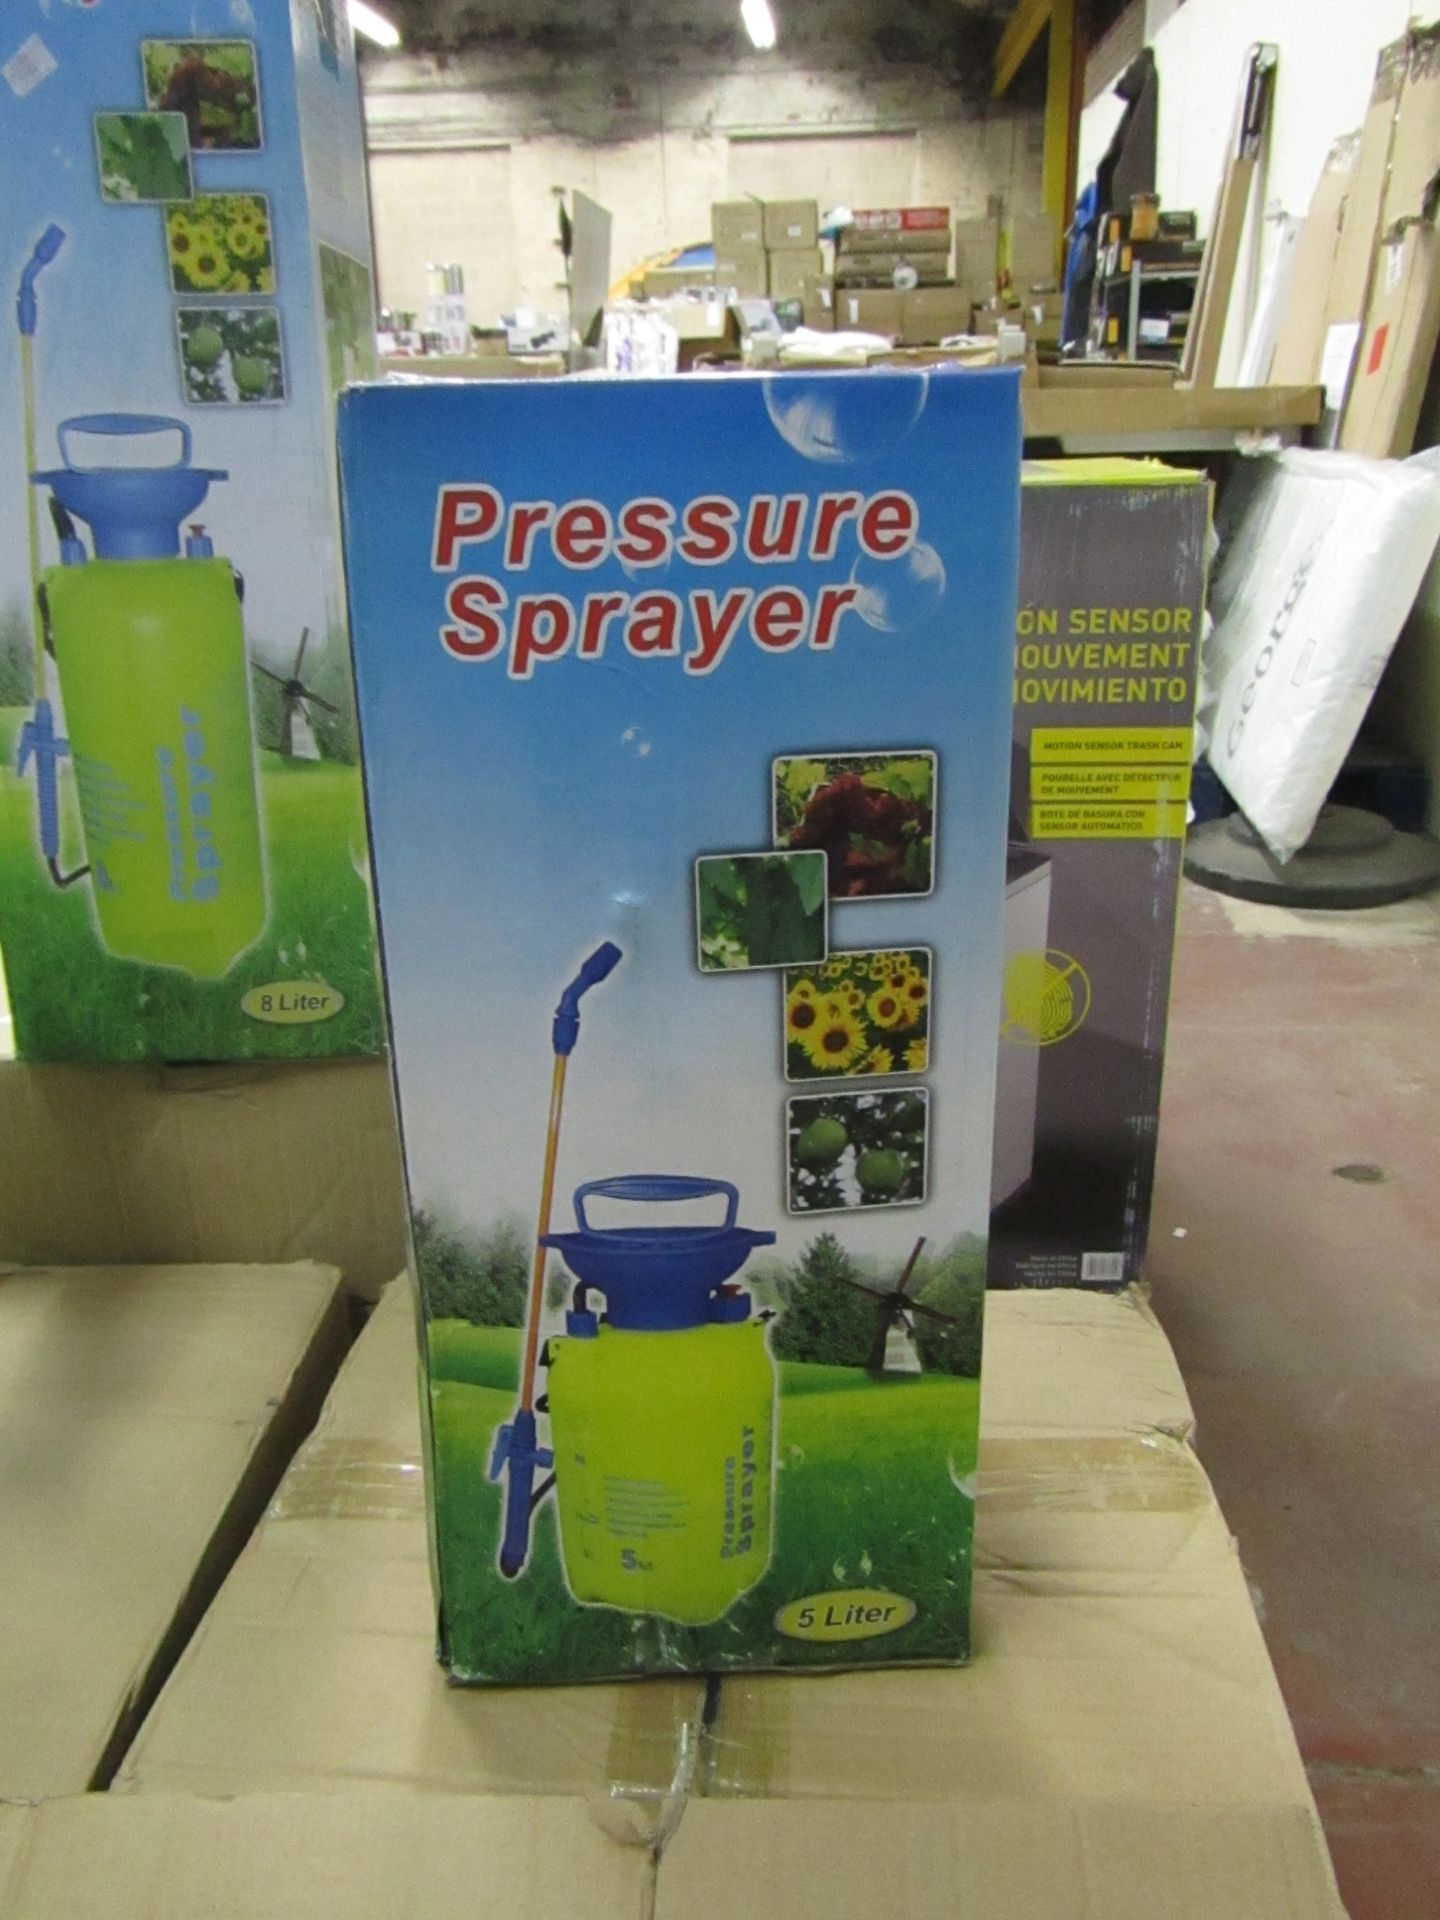 pressure sprayer 5liter new and boxed